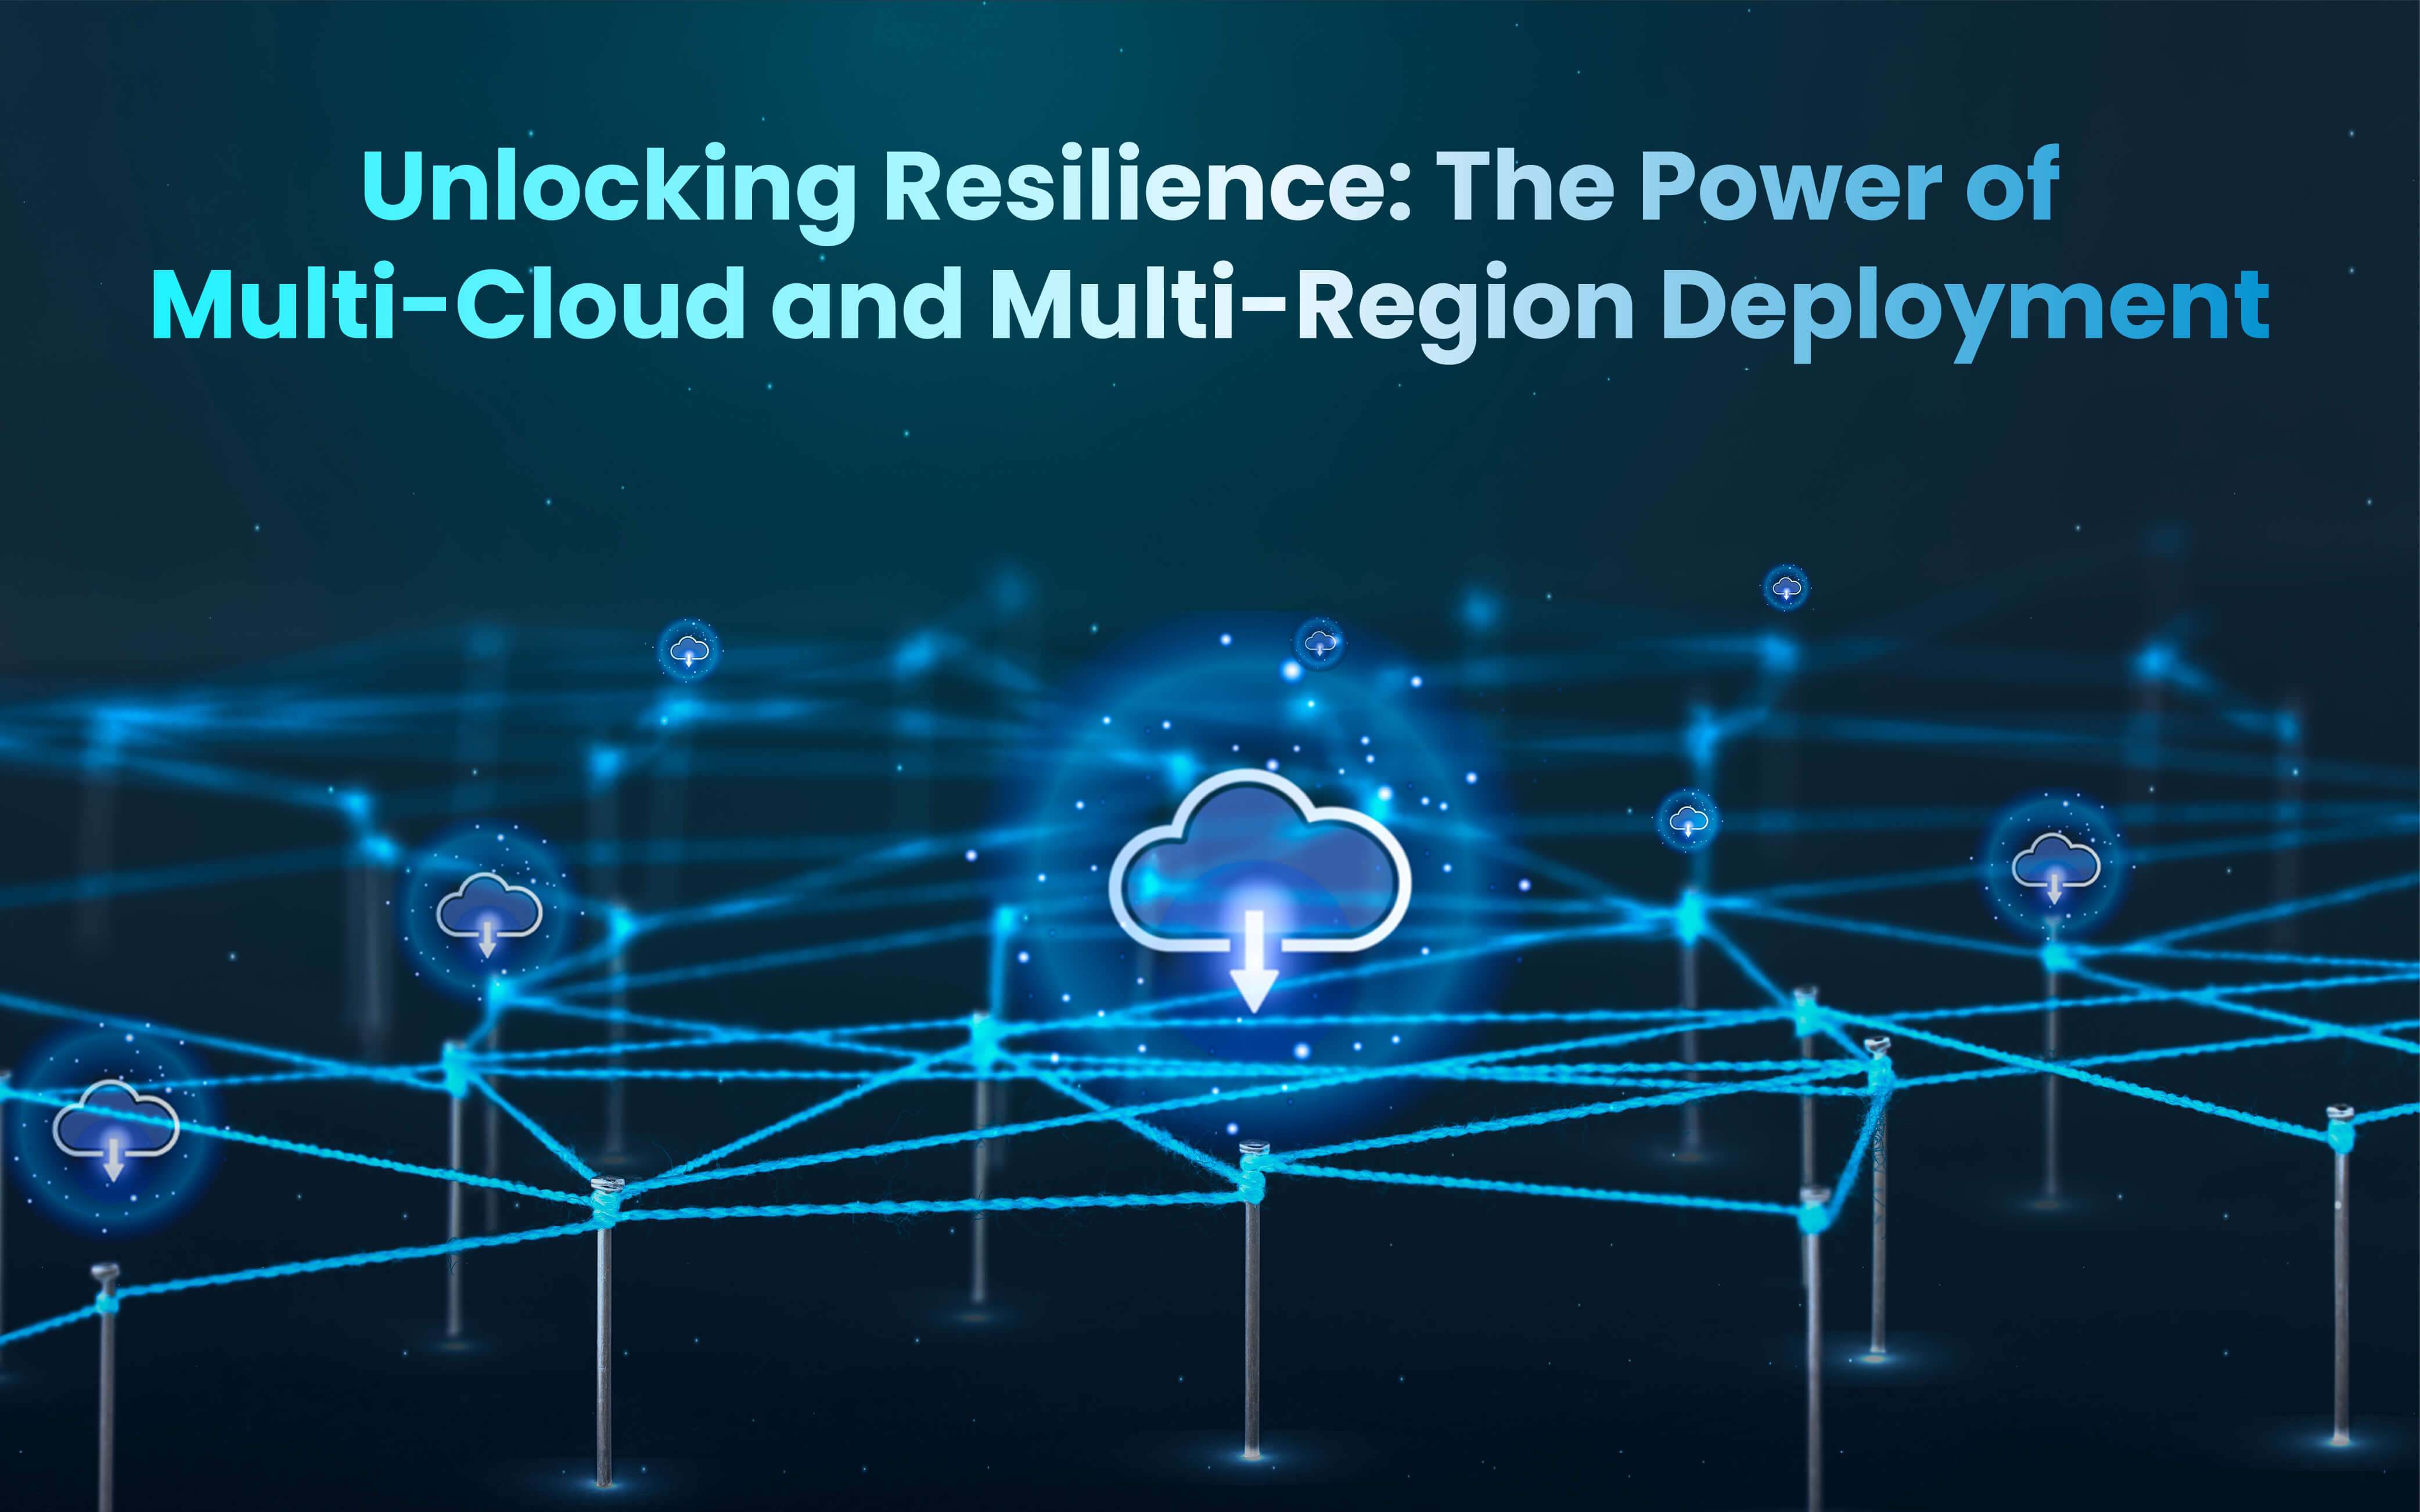 Unlocking Resilience: The Power of Multi-Cloud and Multi-Region Deployment